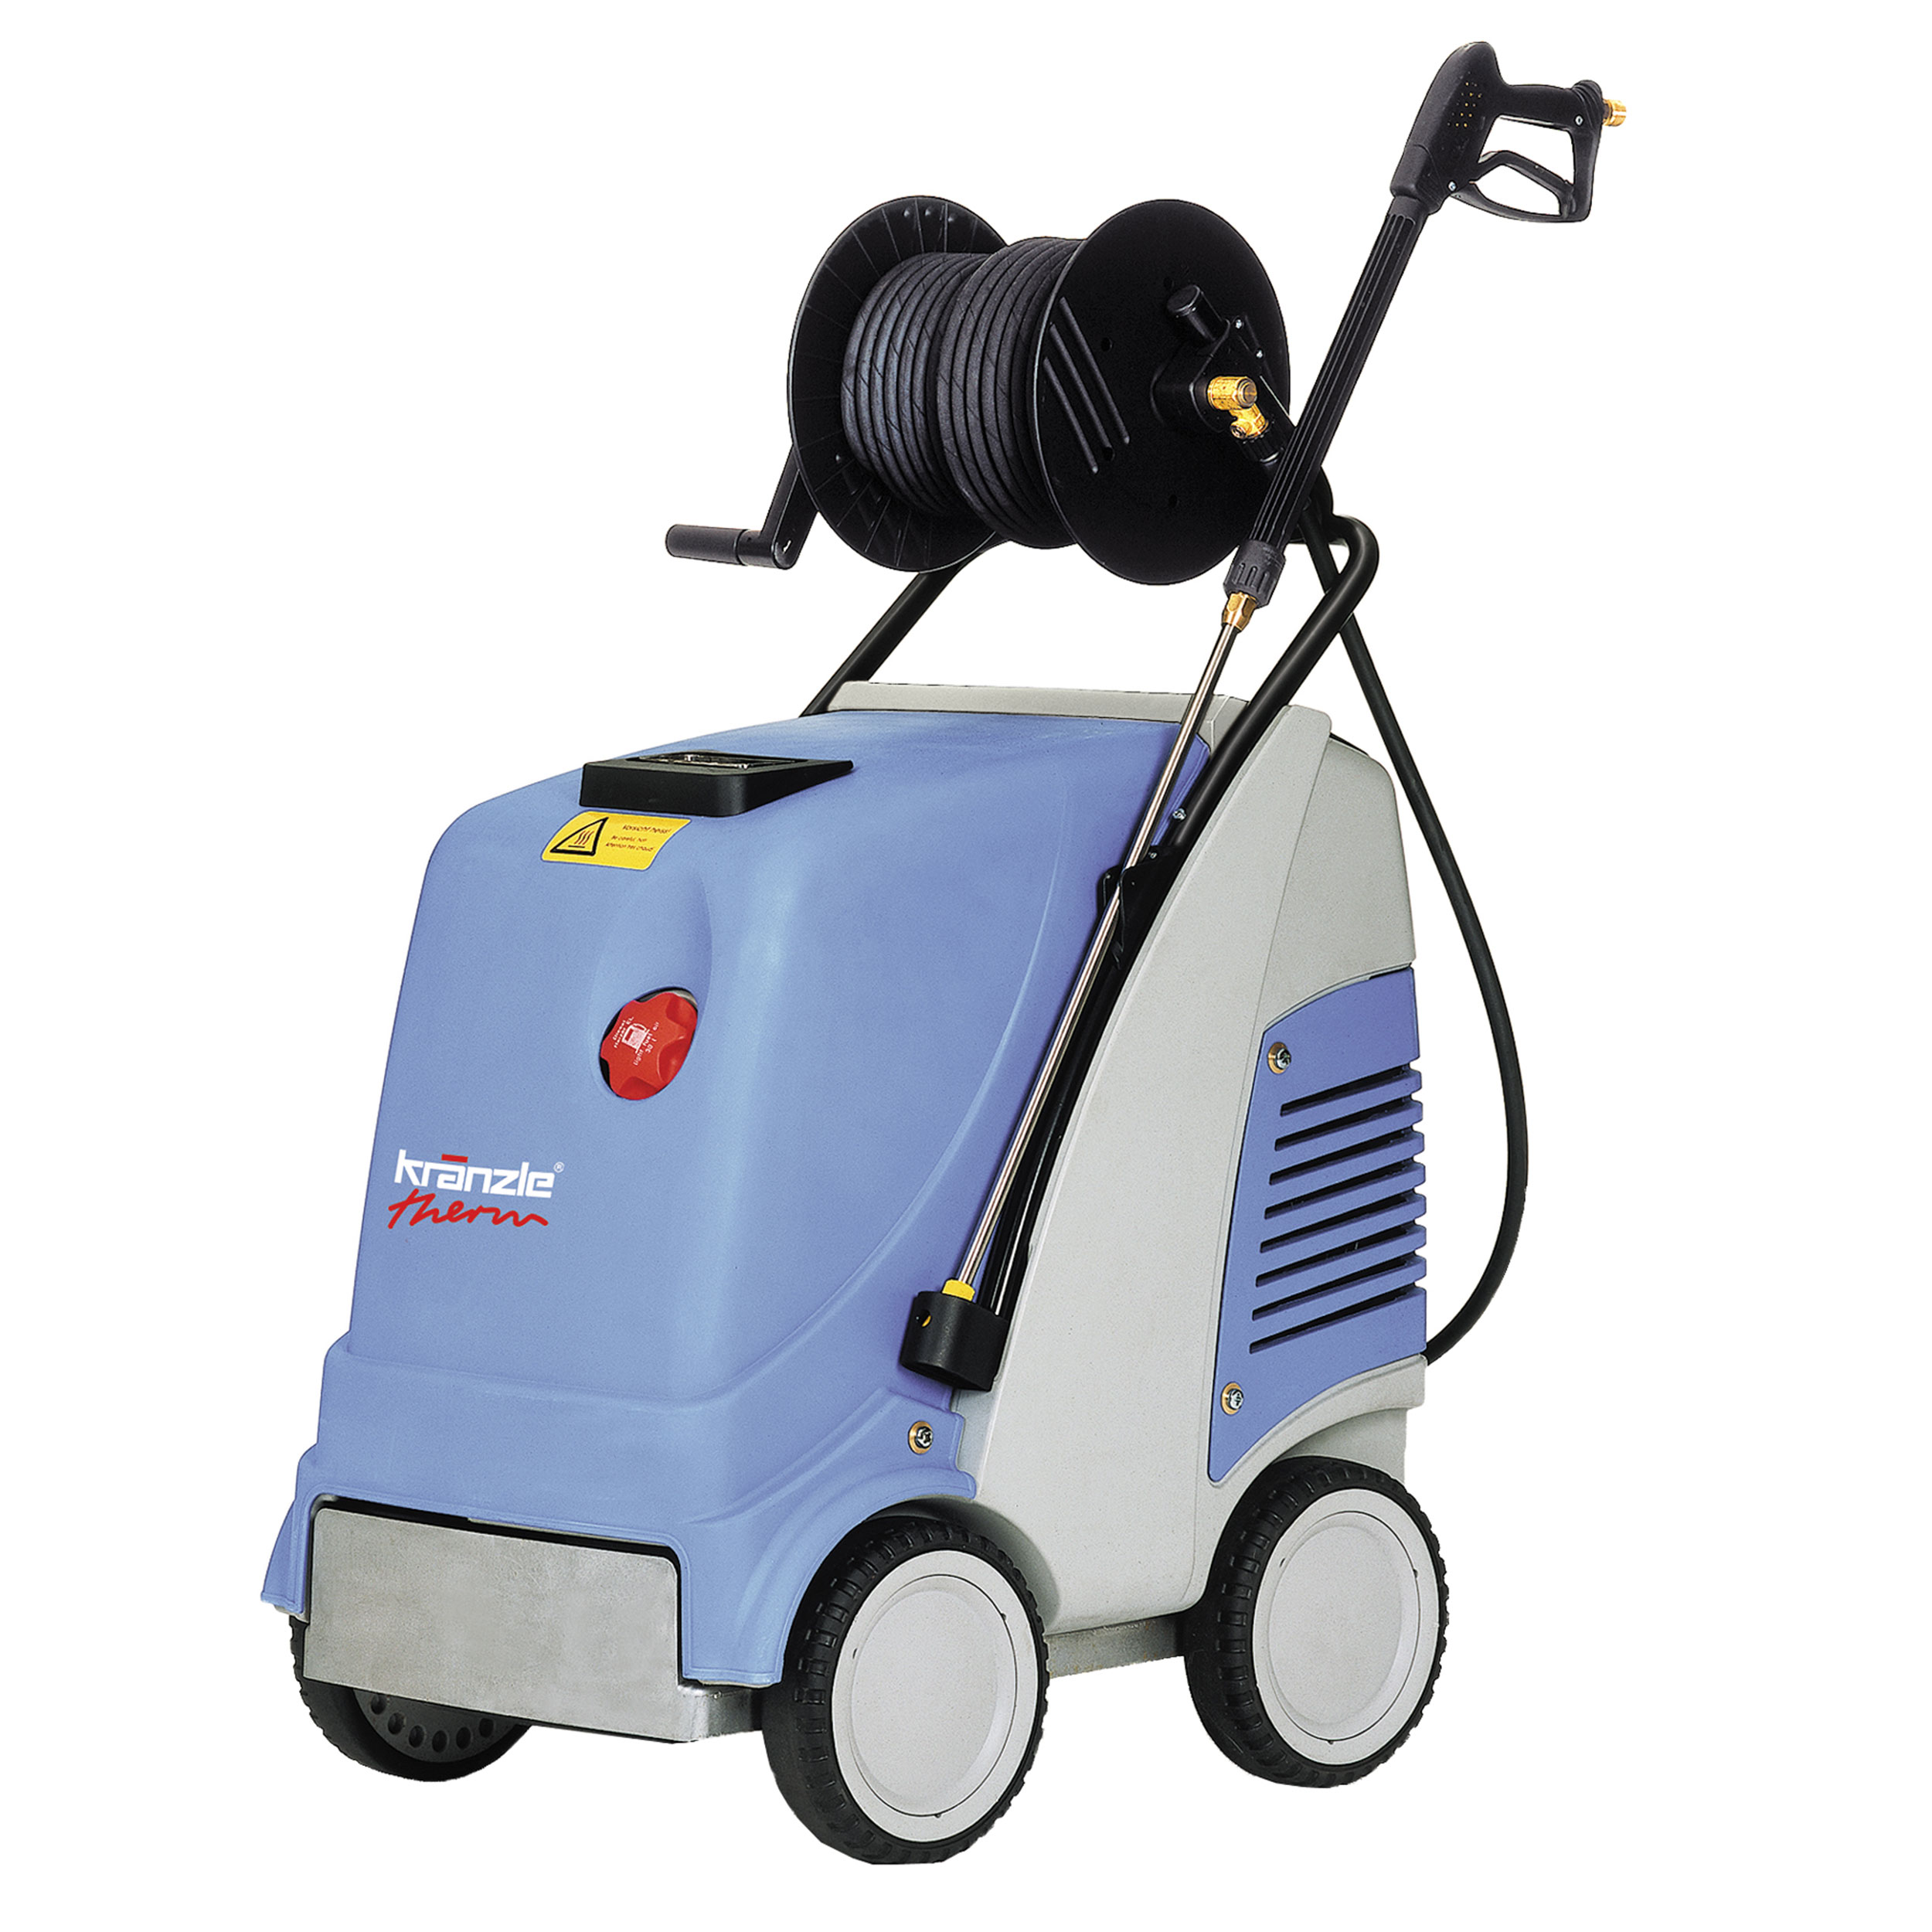 Thermc 11/130tst Pressure Washer, Hot Water, 220v, 15a, 1ph